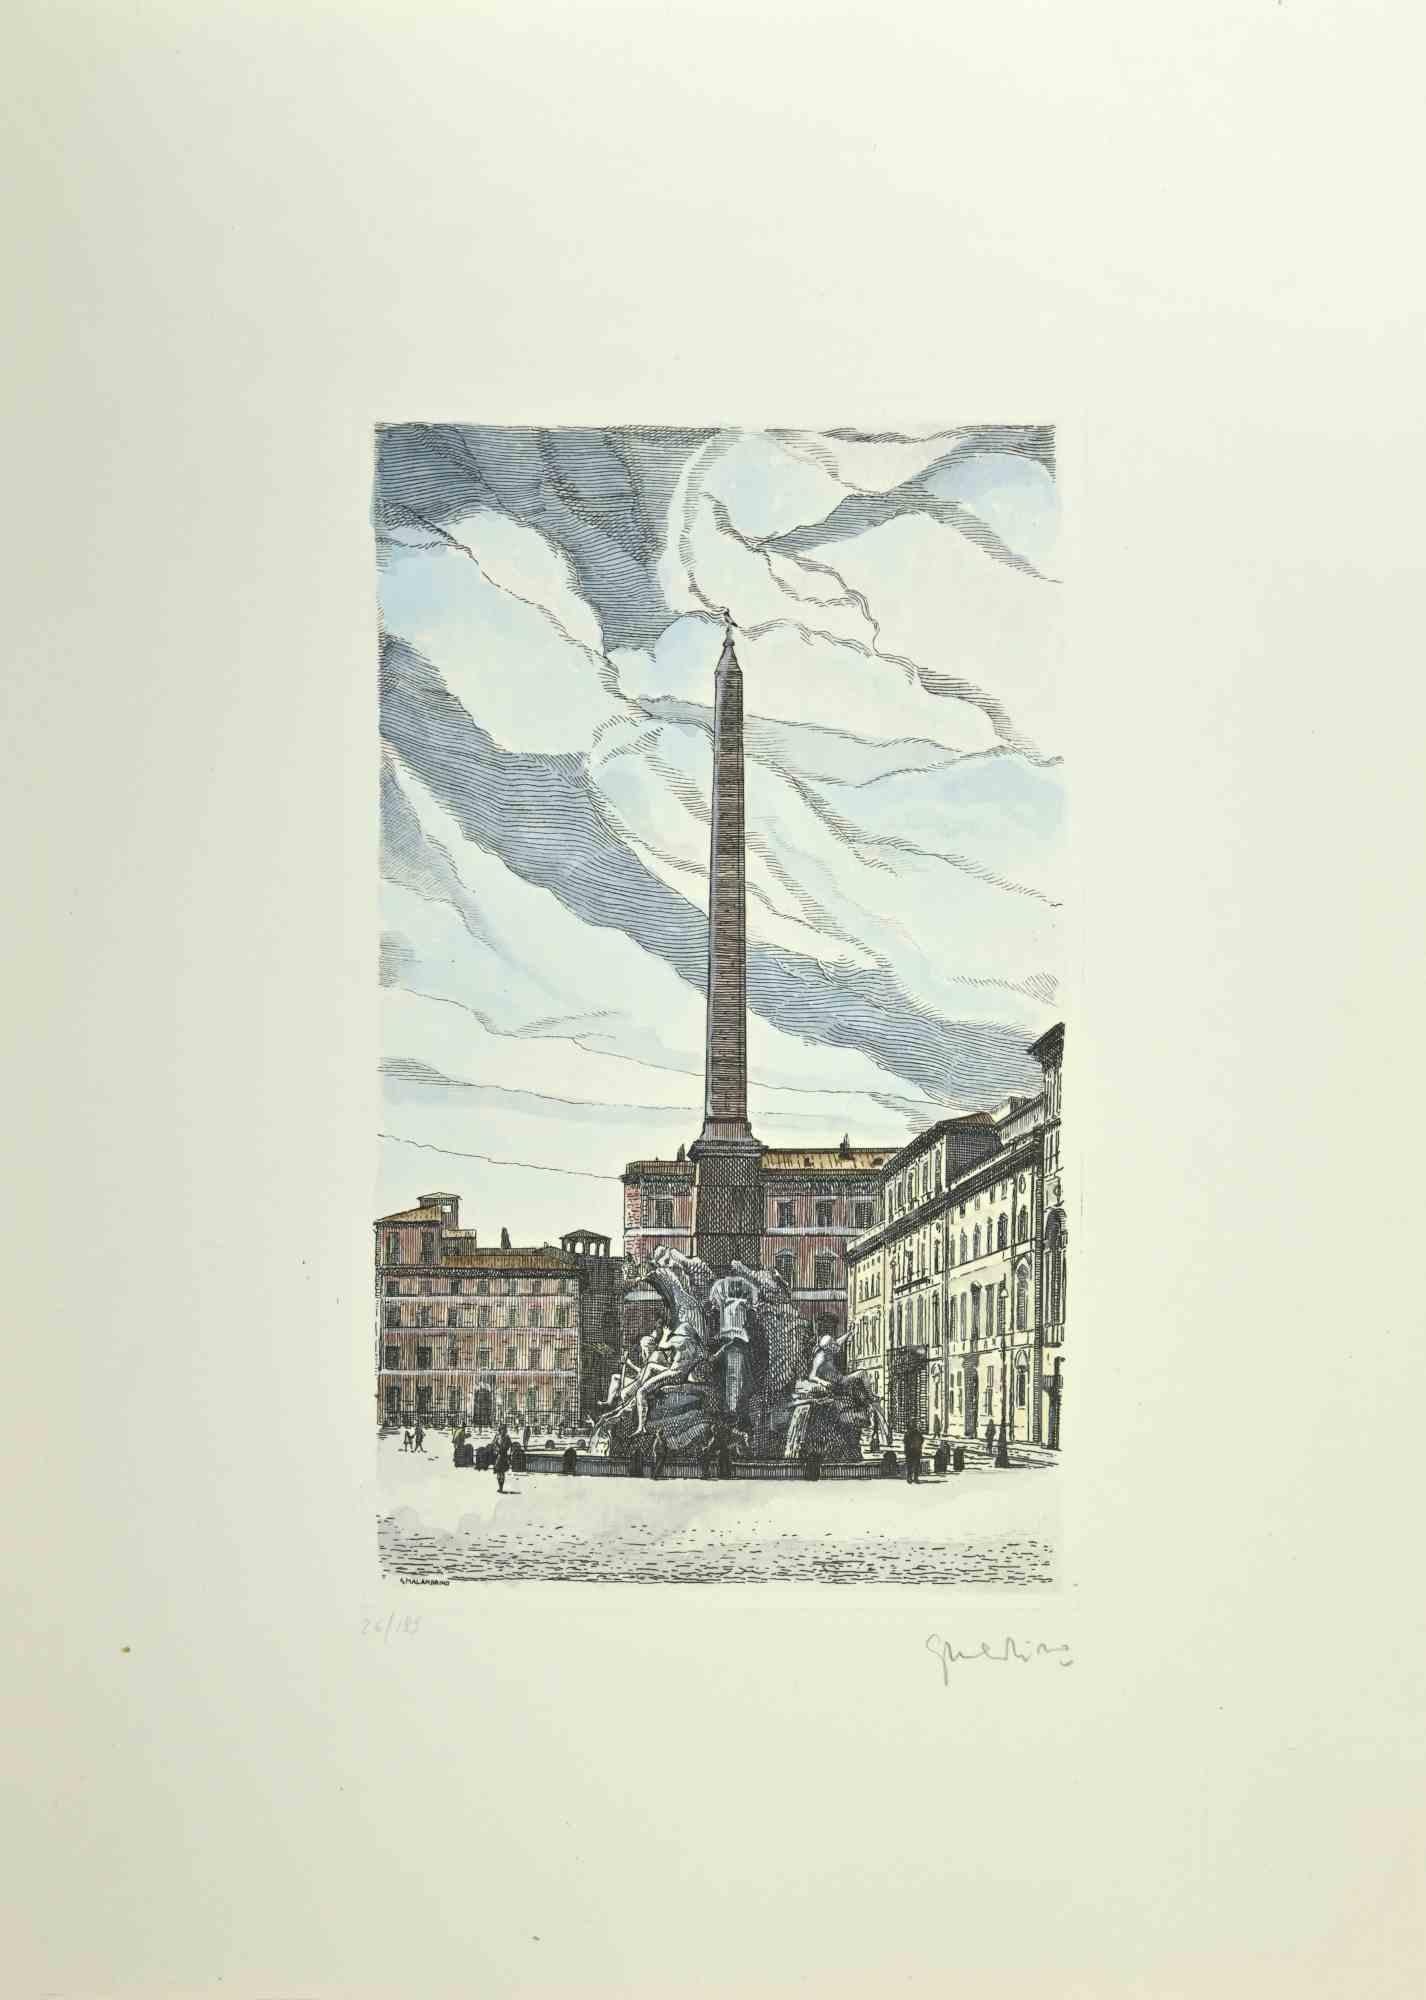 Piazza Navona is an artwork realized by Giuseppe Malandrino.

Print in etching technique

Hand-signed by the artist in pencil on the lower right corner.

Numbered edition,26/199.

Good condition.

This artwork represents the beautiful Roman